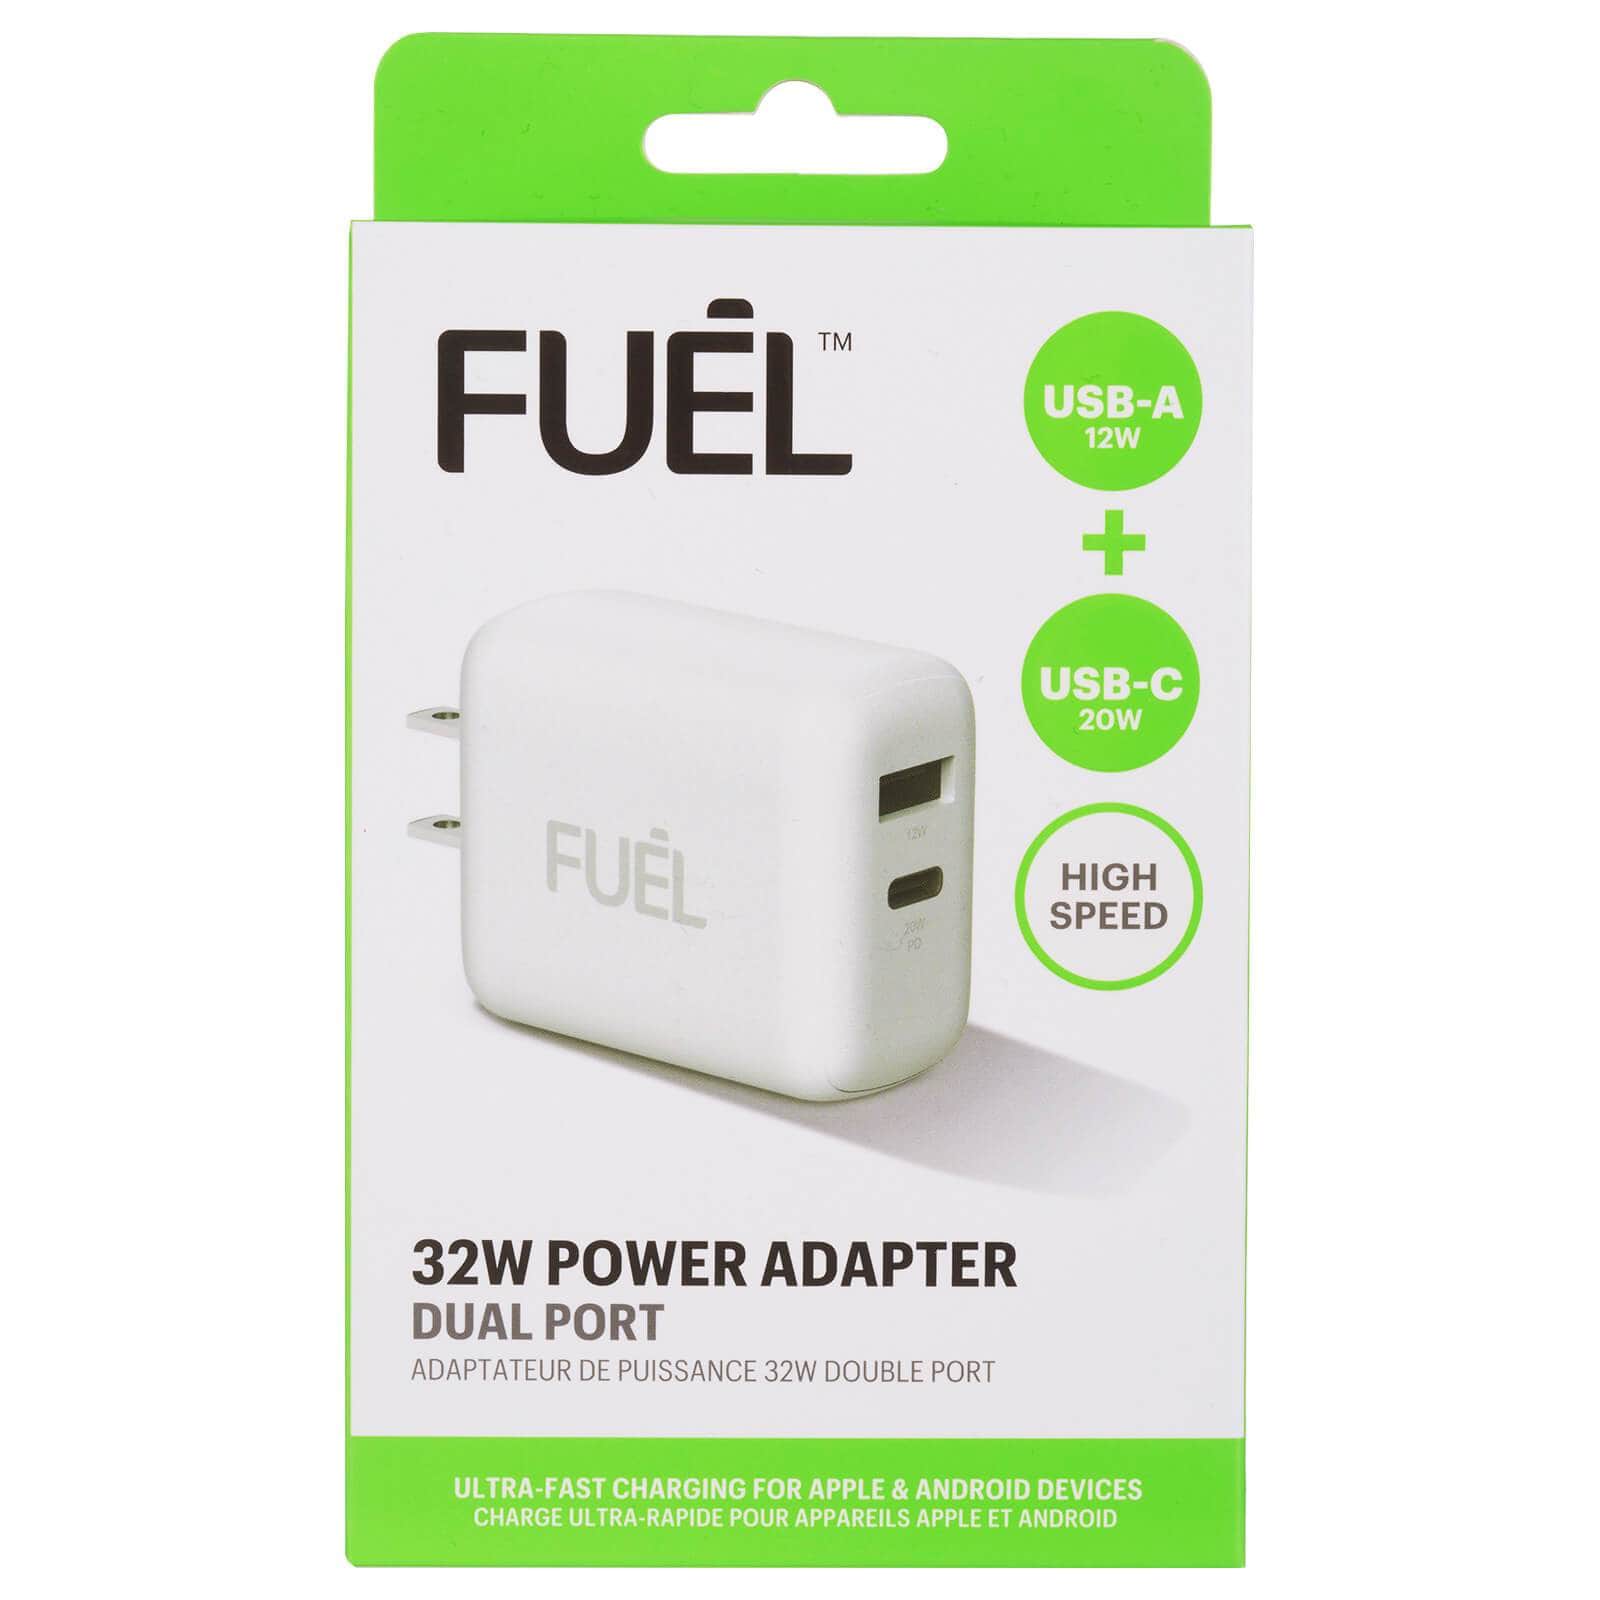 Fuel USB-A 12 W + USB-C 20W. High Speed. 32W Power Adapter Dual Port. Ultra fast charging for Apple & Android devices. color::White